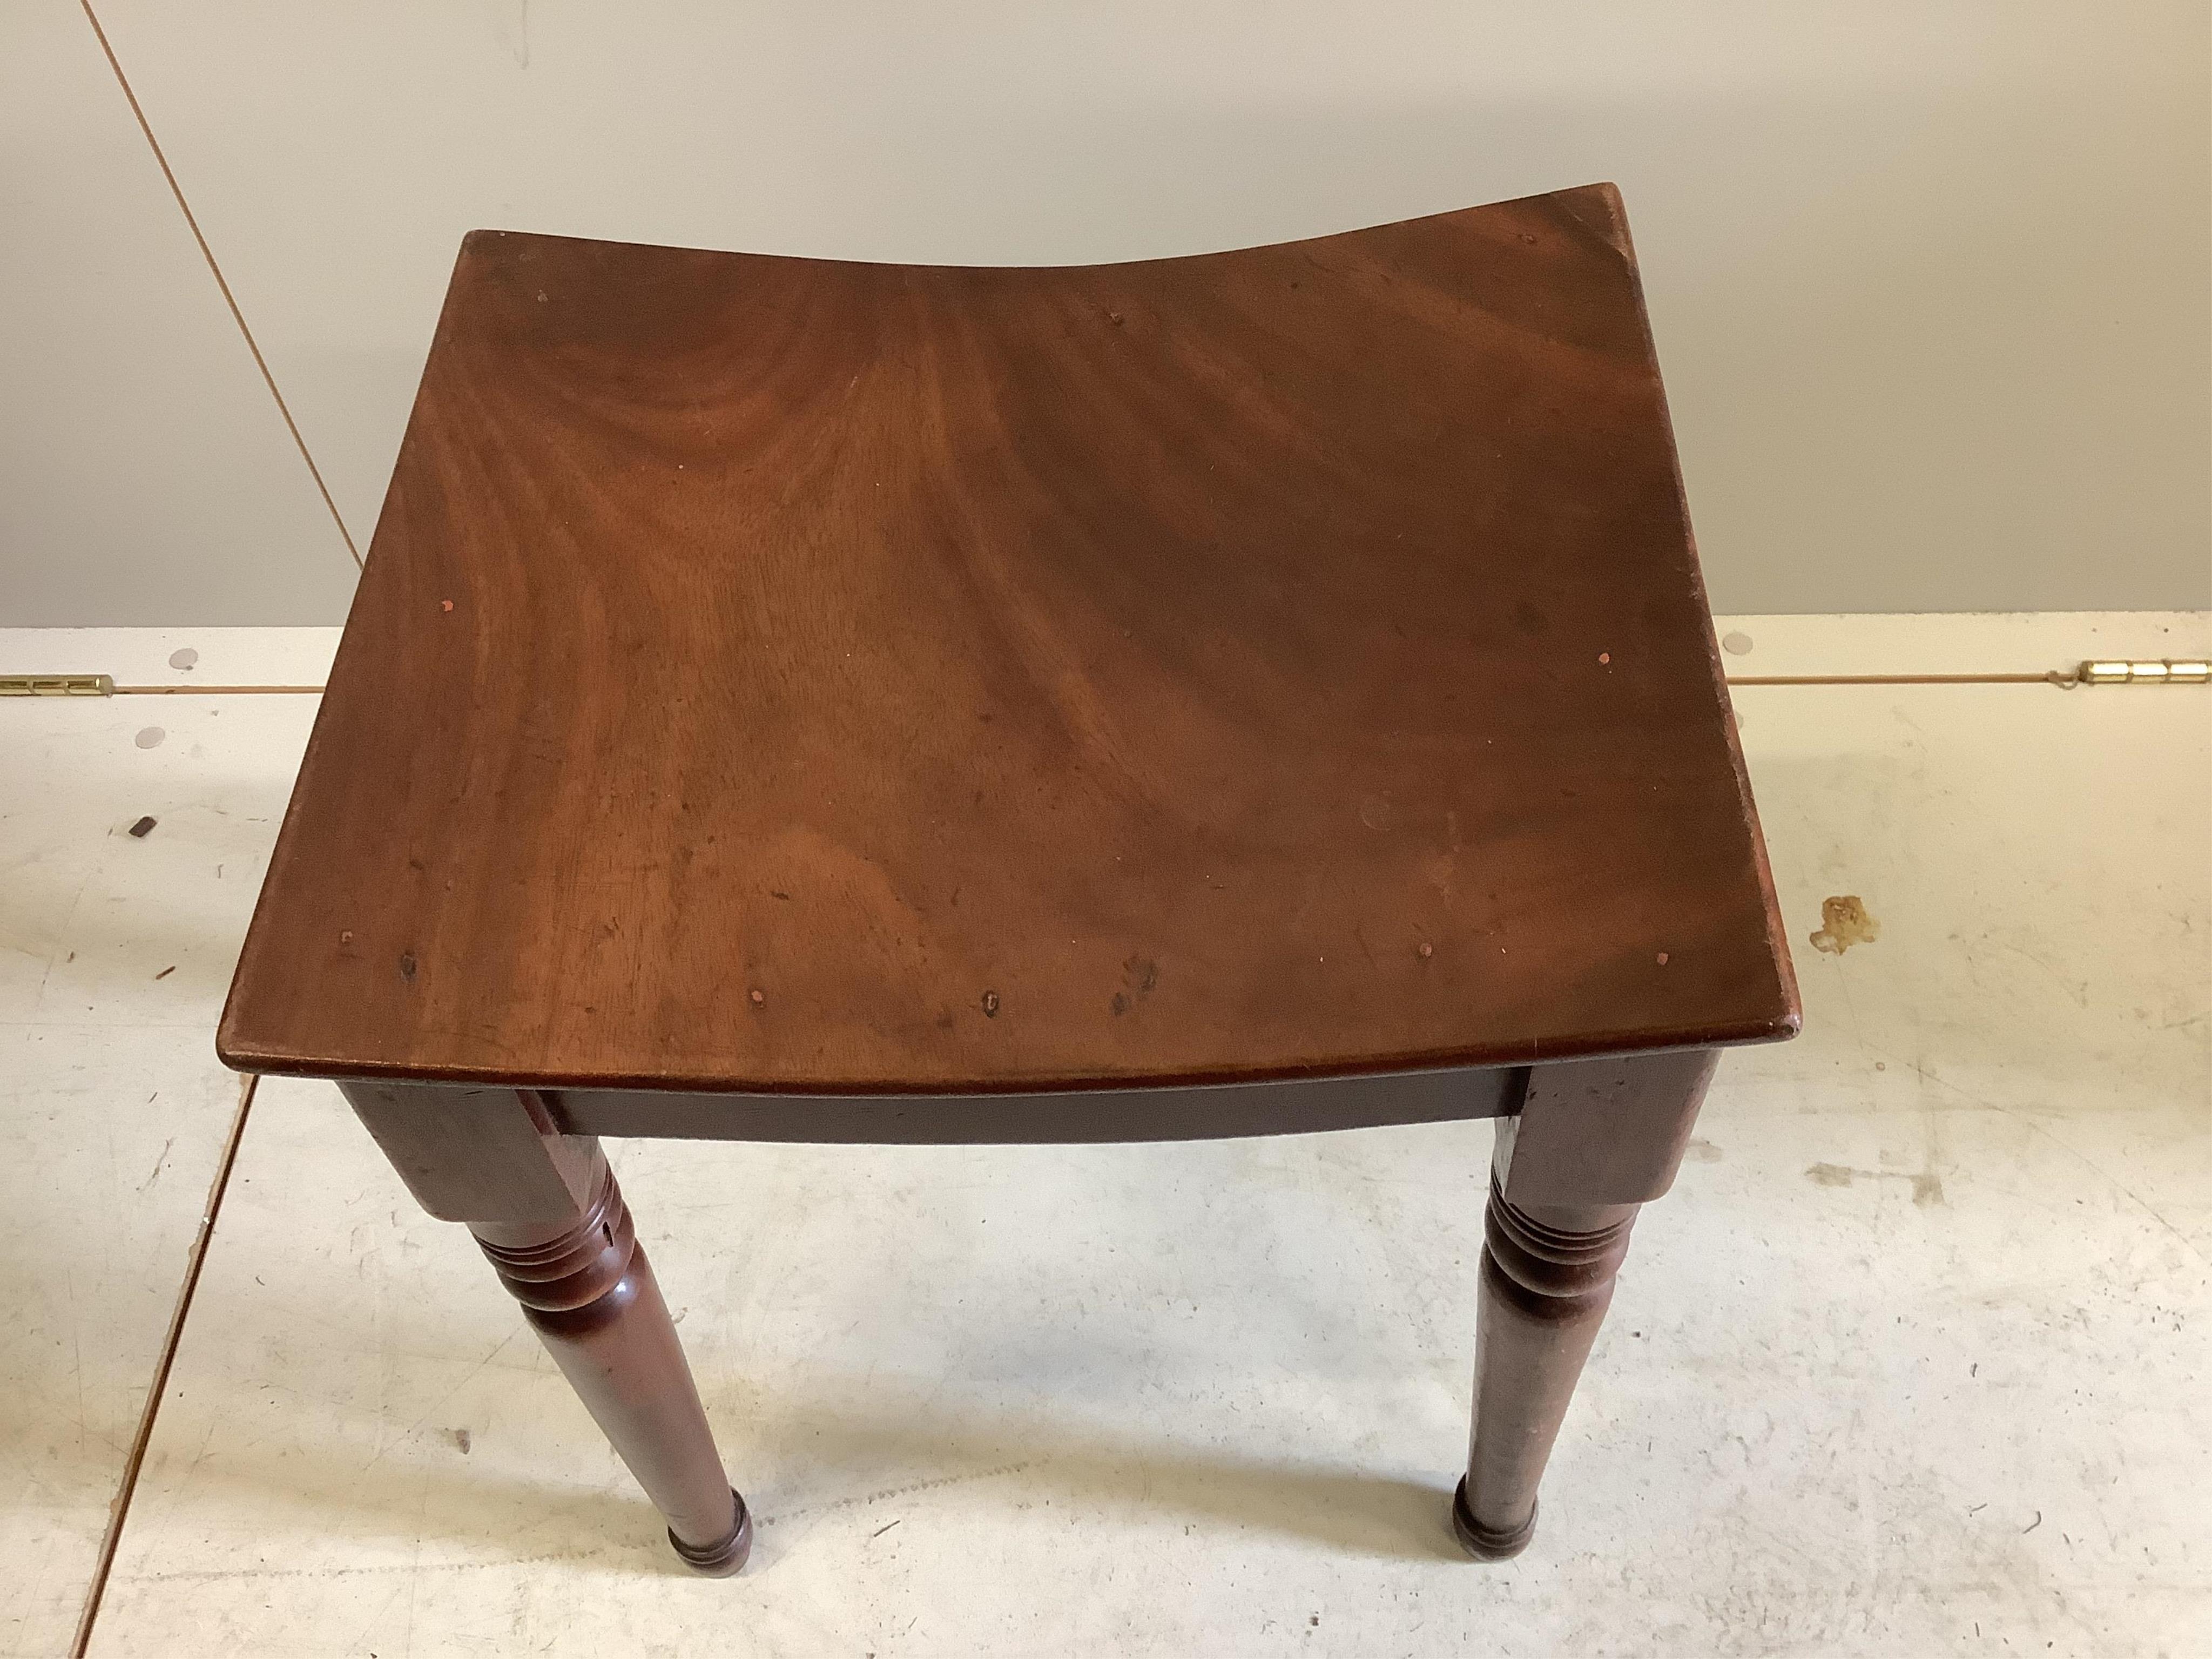 A Regency mahogany stool with curved seat, stamped Gillows, width 36cm, depth 36cm, height 48cm - Image 2 of 3